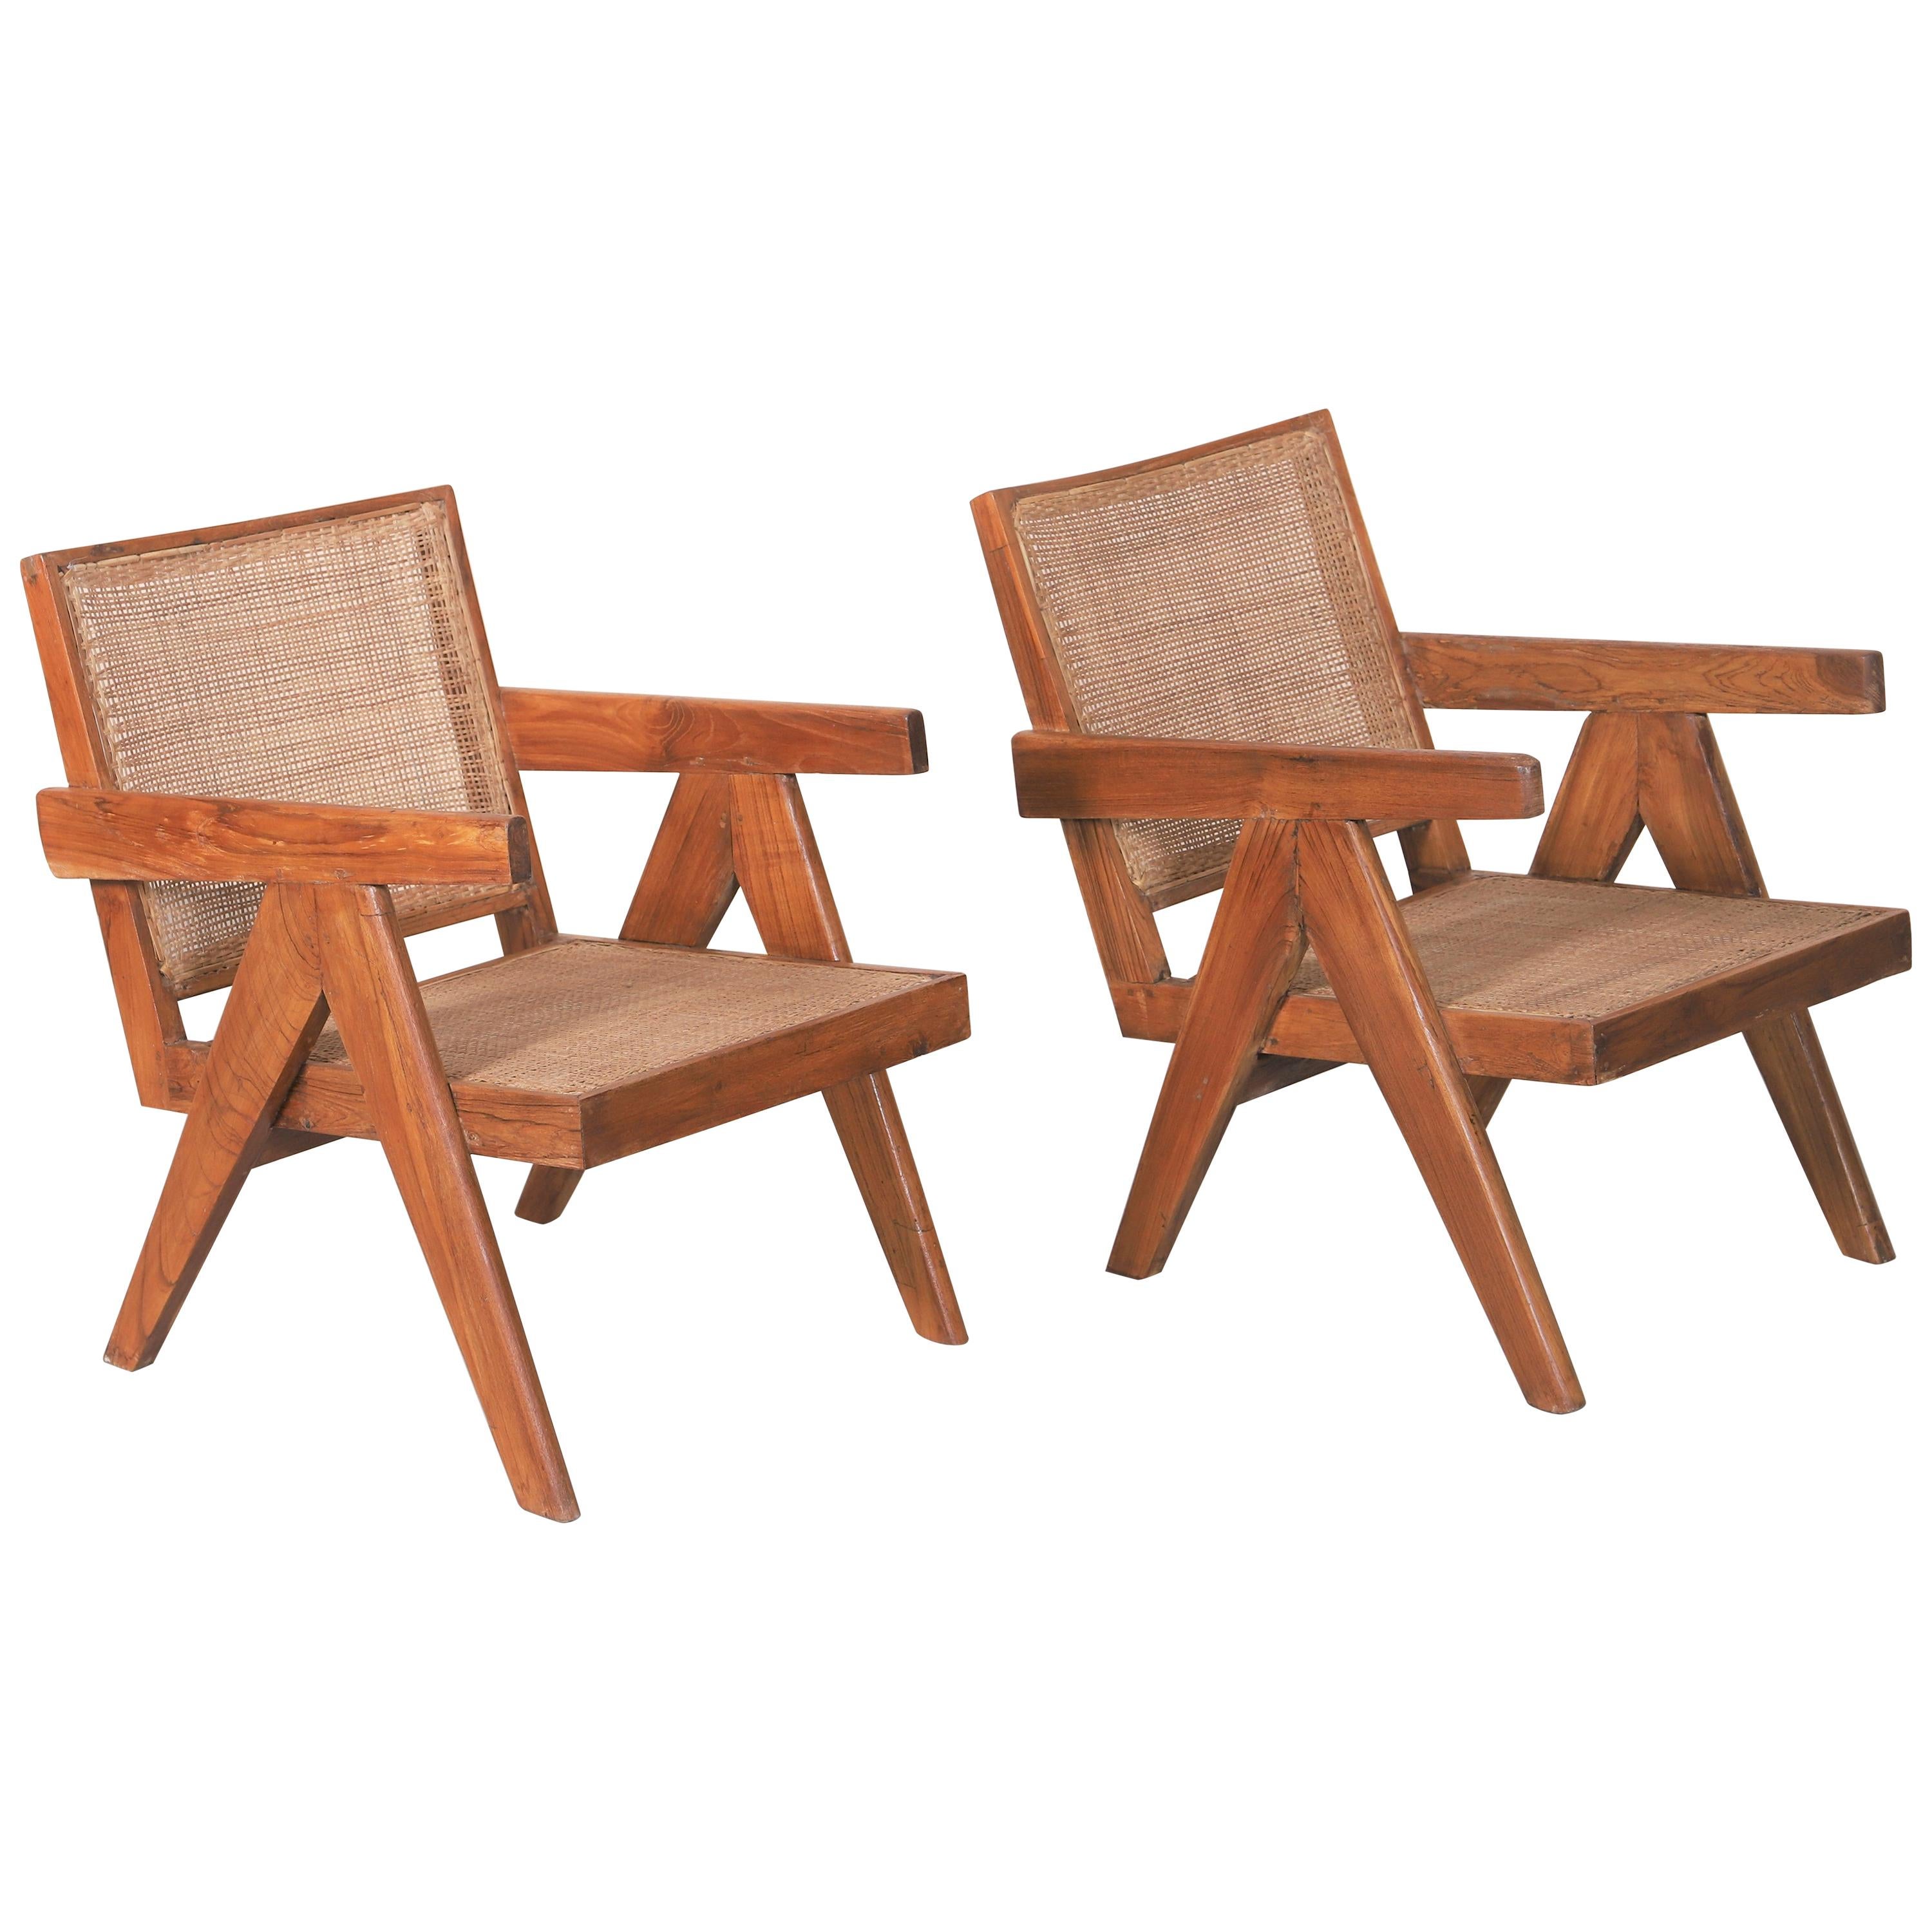 Set of Two 'Easy Armchairs' circa 1955 by Pierre Jeanneret